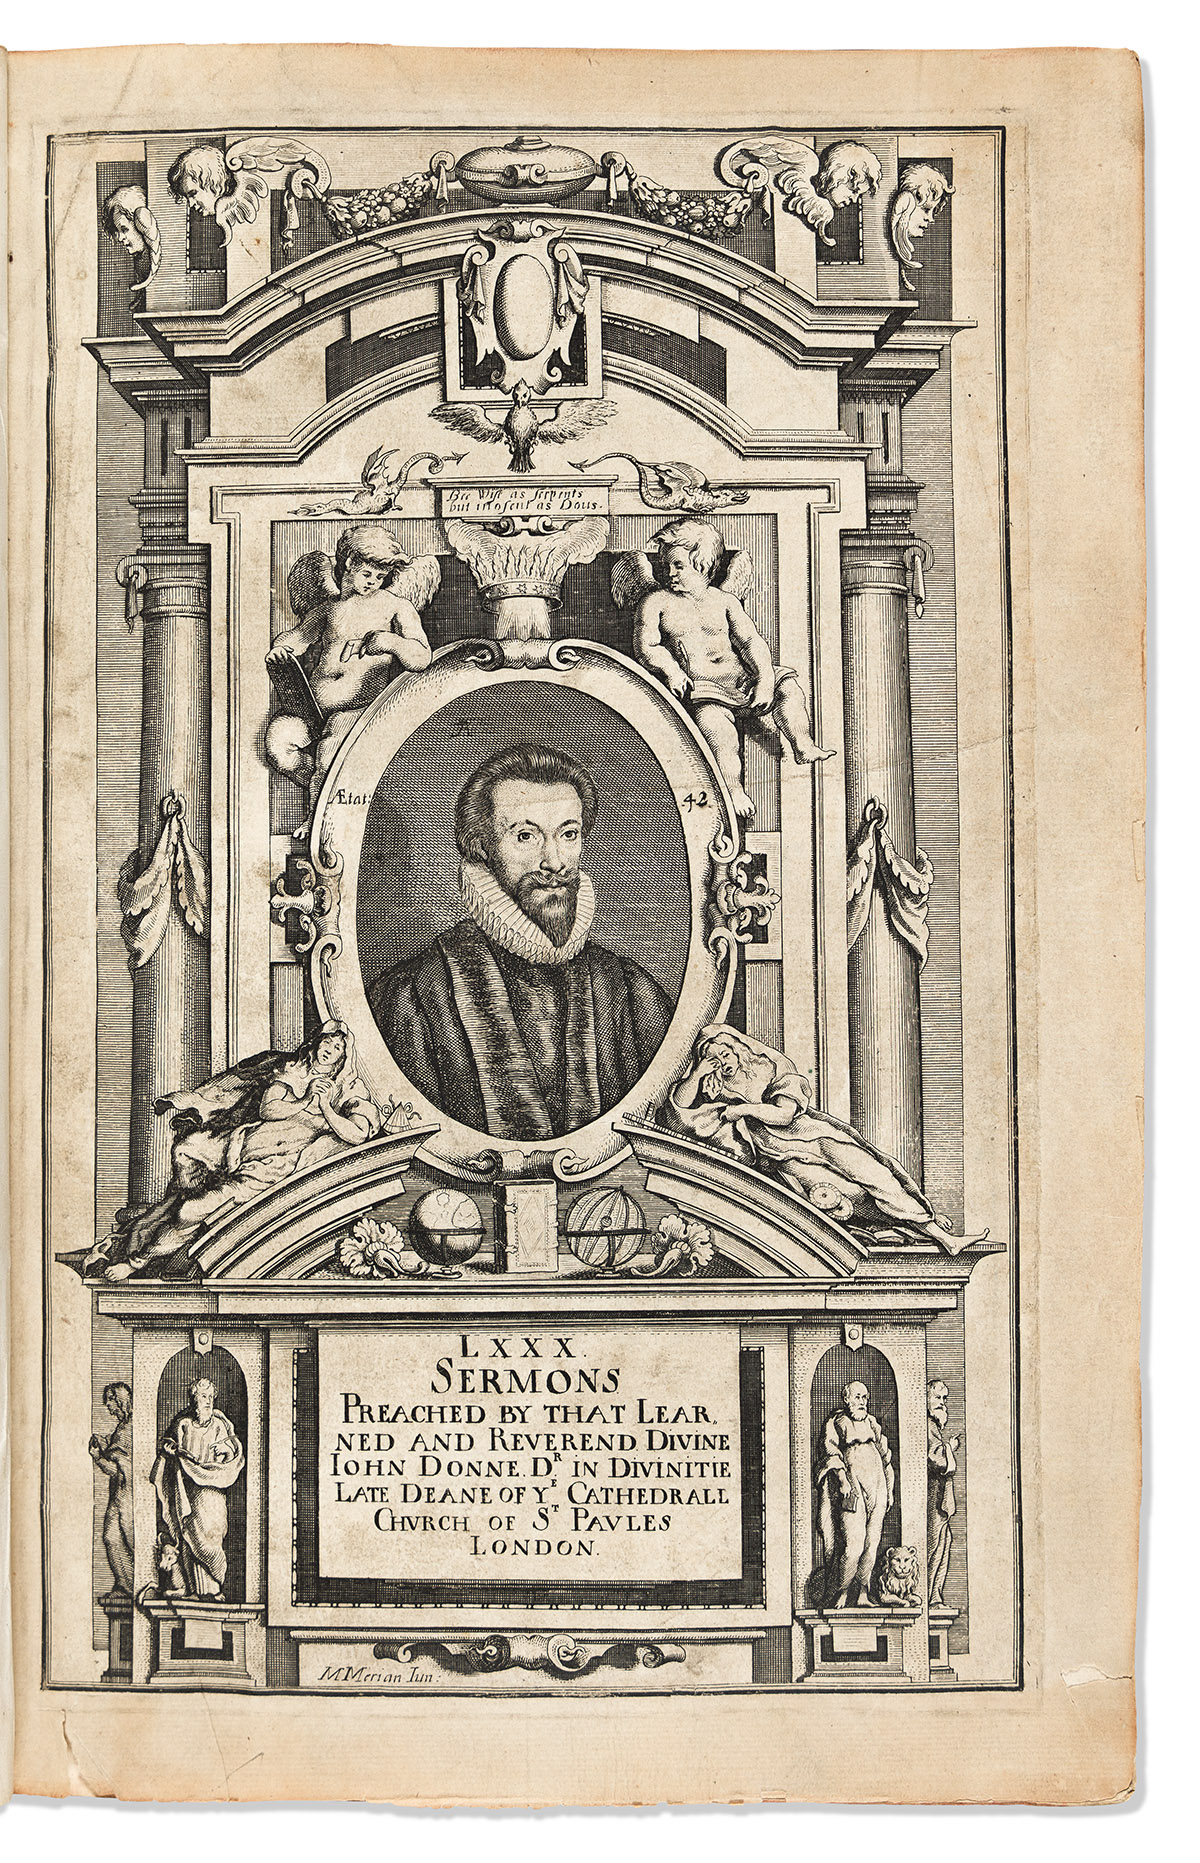 Donne, John (1572-1631) LXXX Sermons Preached by that Learned and Reverend Divine.